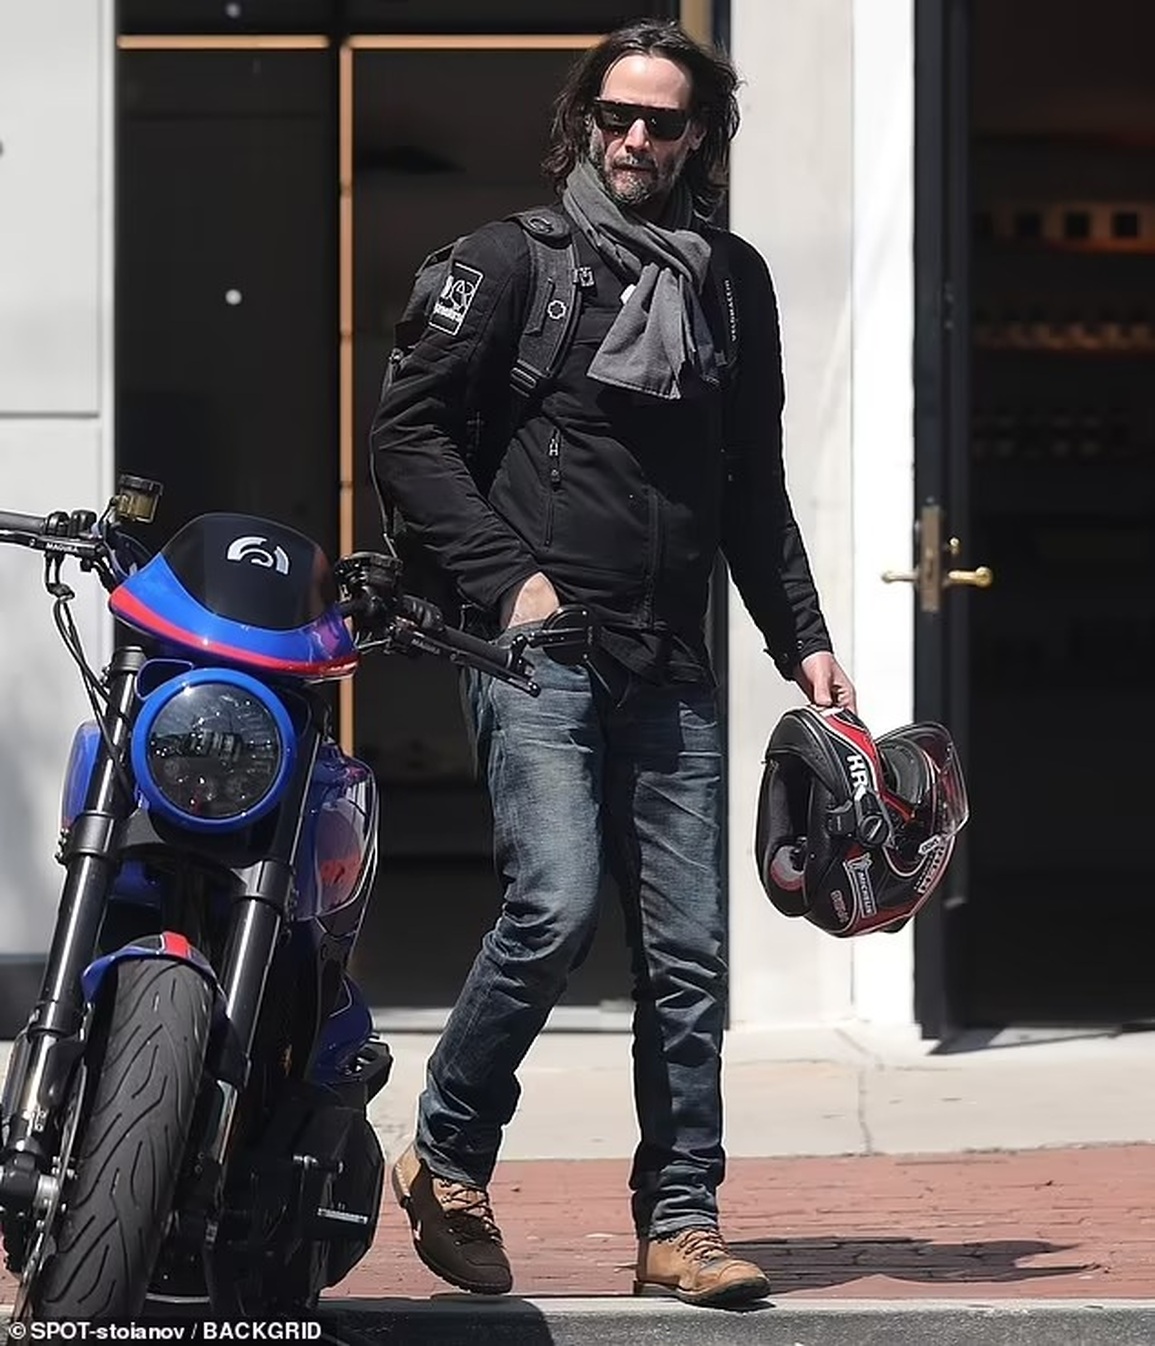 Keanu Reeves goes ring shopping, sparking speculation that he is about to propose to his girlfriend - 2